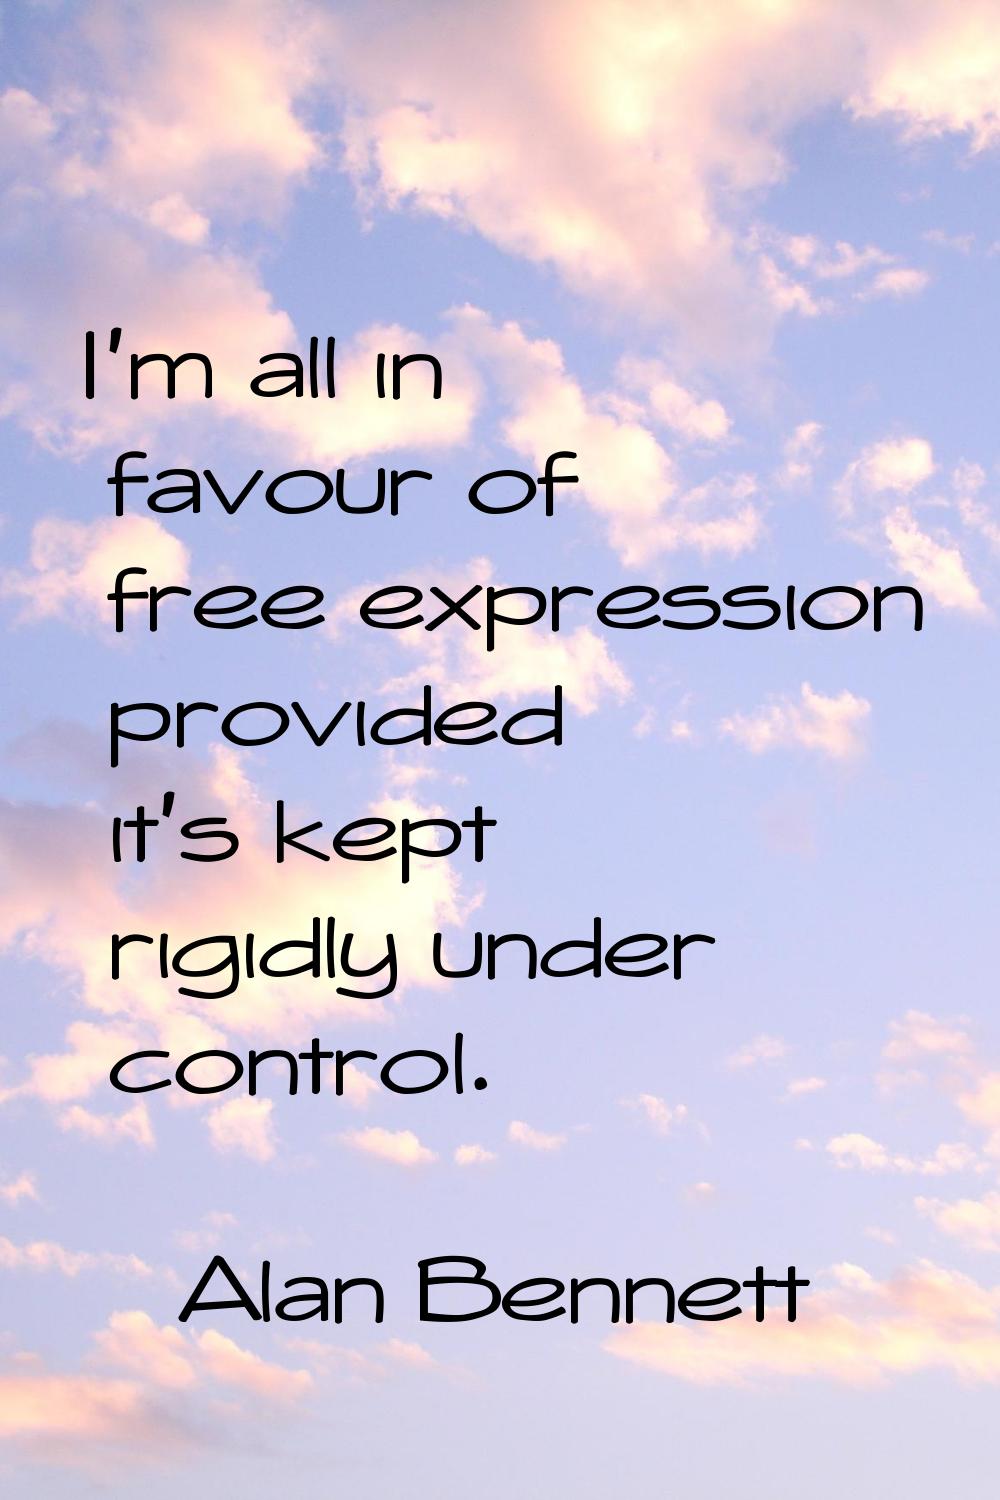 I'm all in favour of free expression provided it's kept rigidly under control.